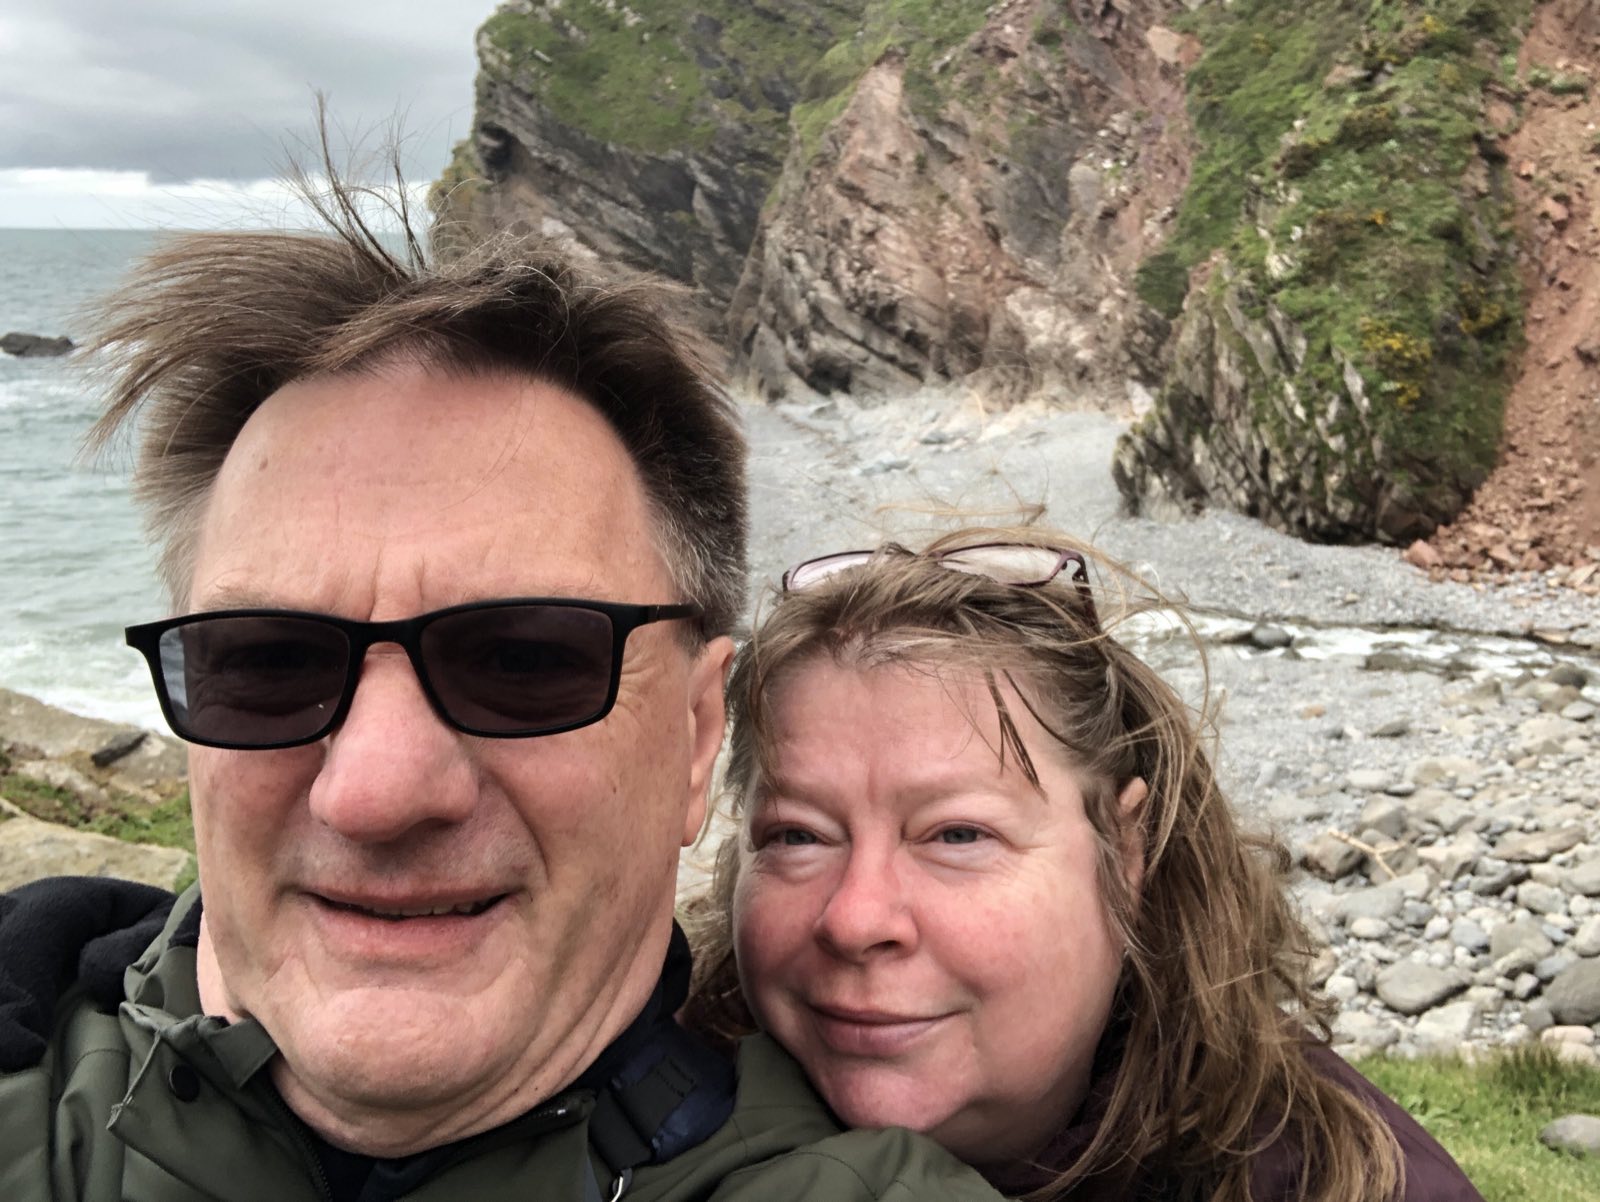 A selfie of two white people looking very happy, with the sea and coast behind them.